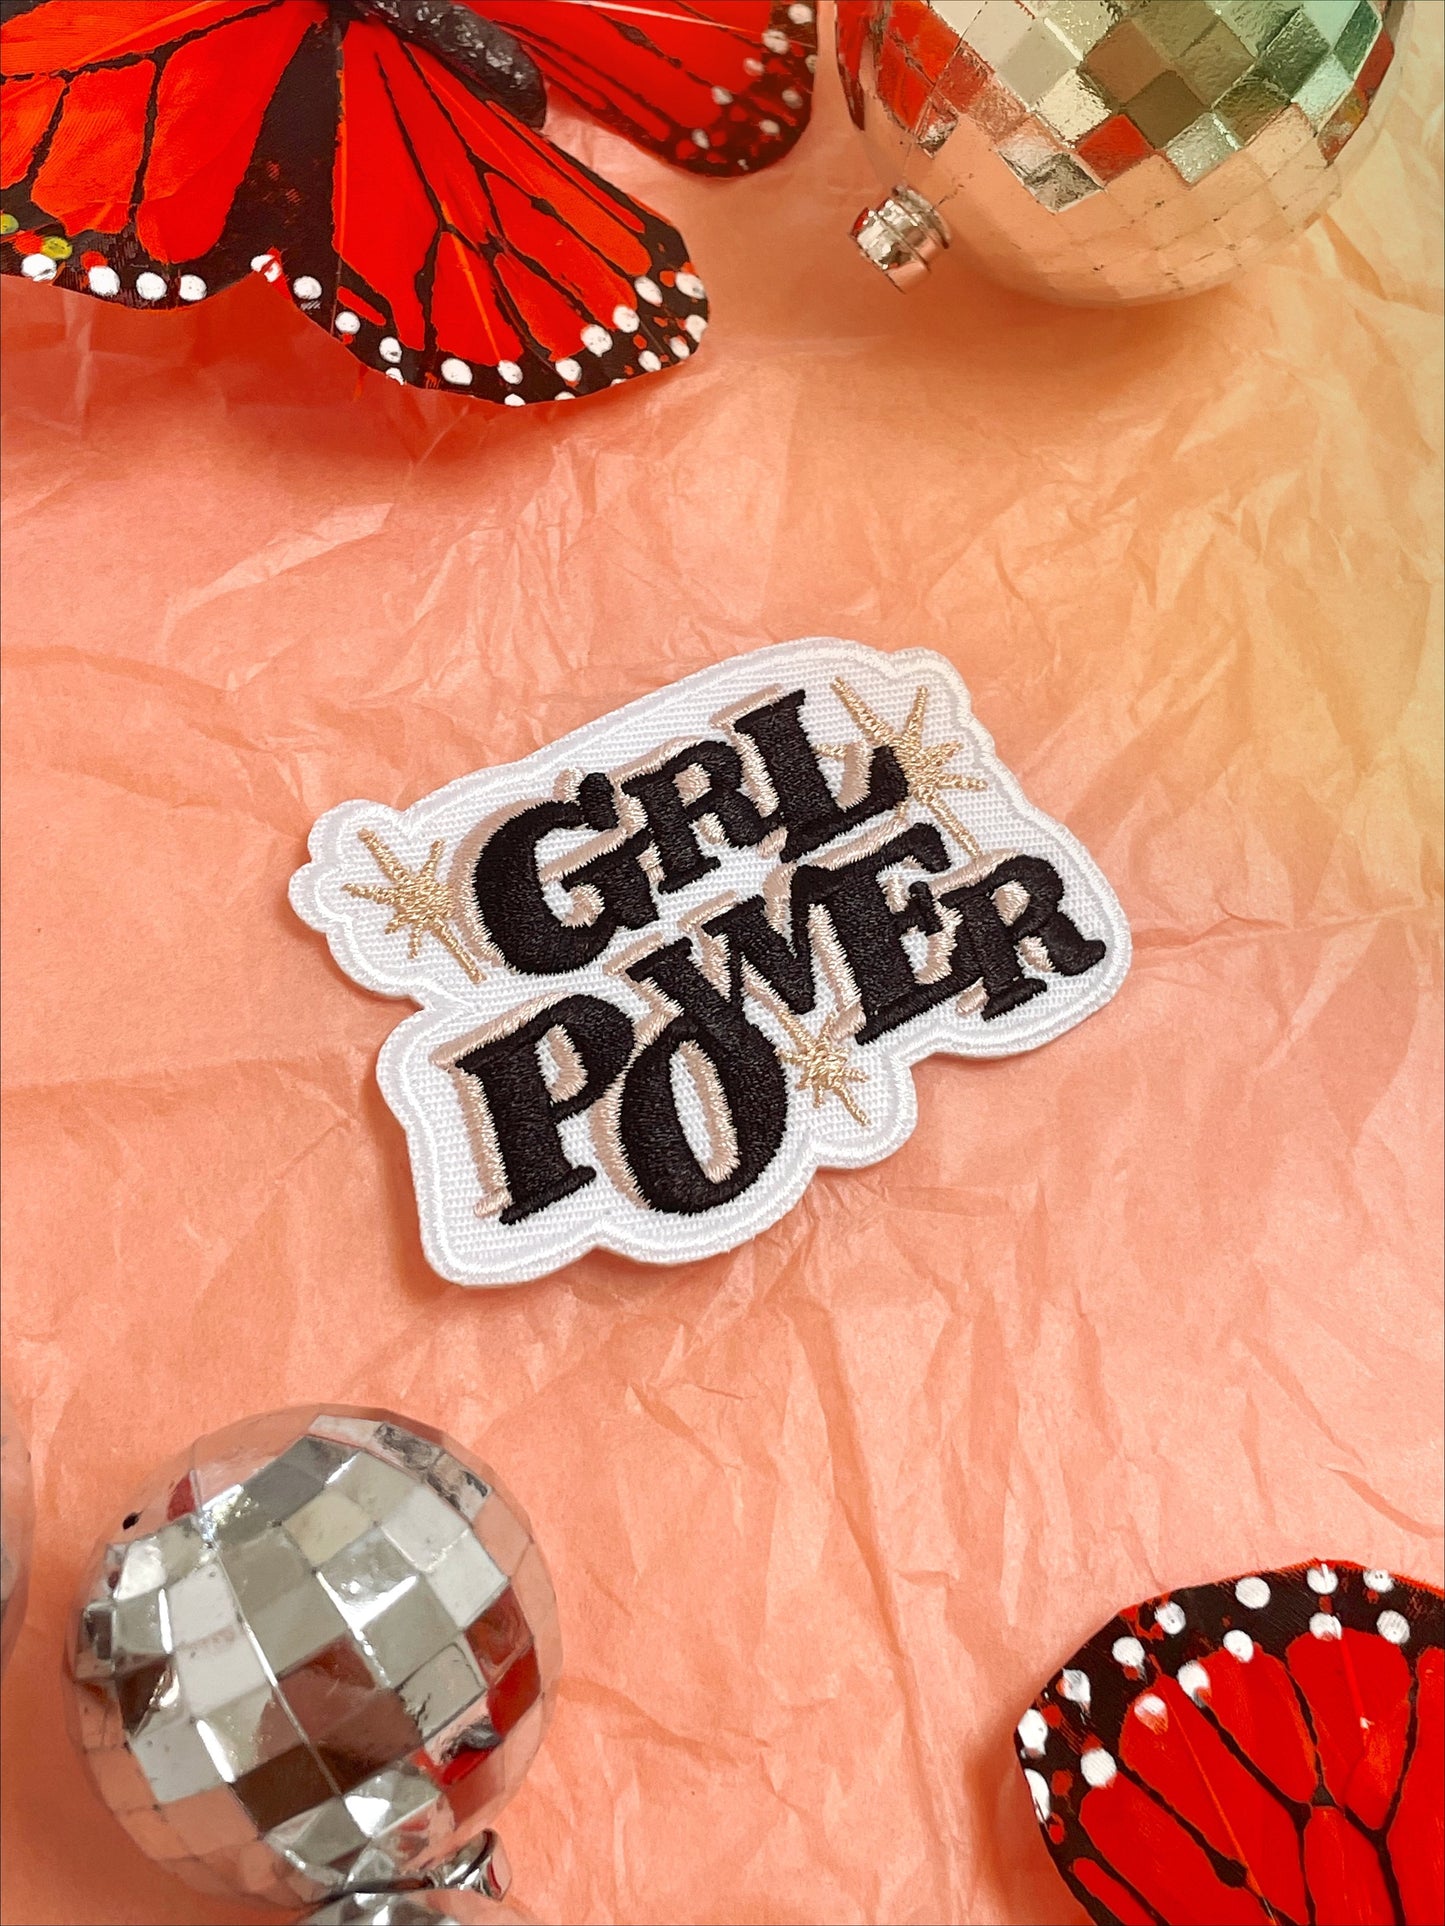 GRL POWER (Iron-On) Patch